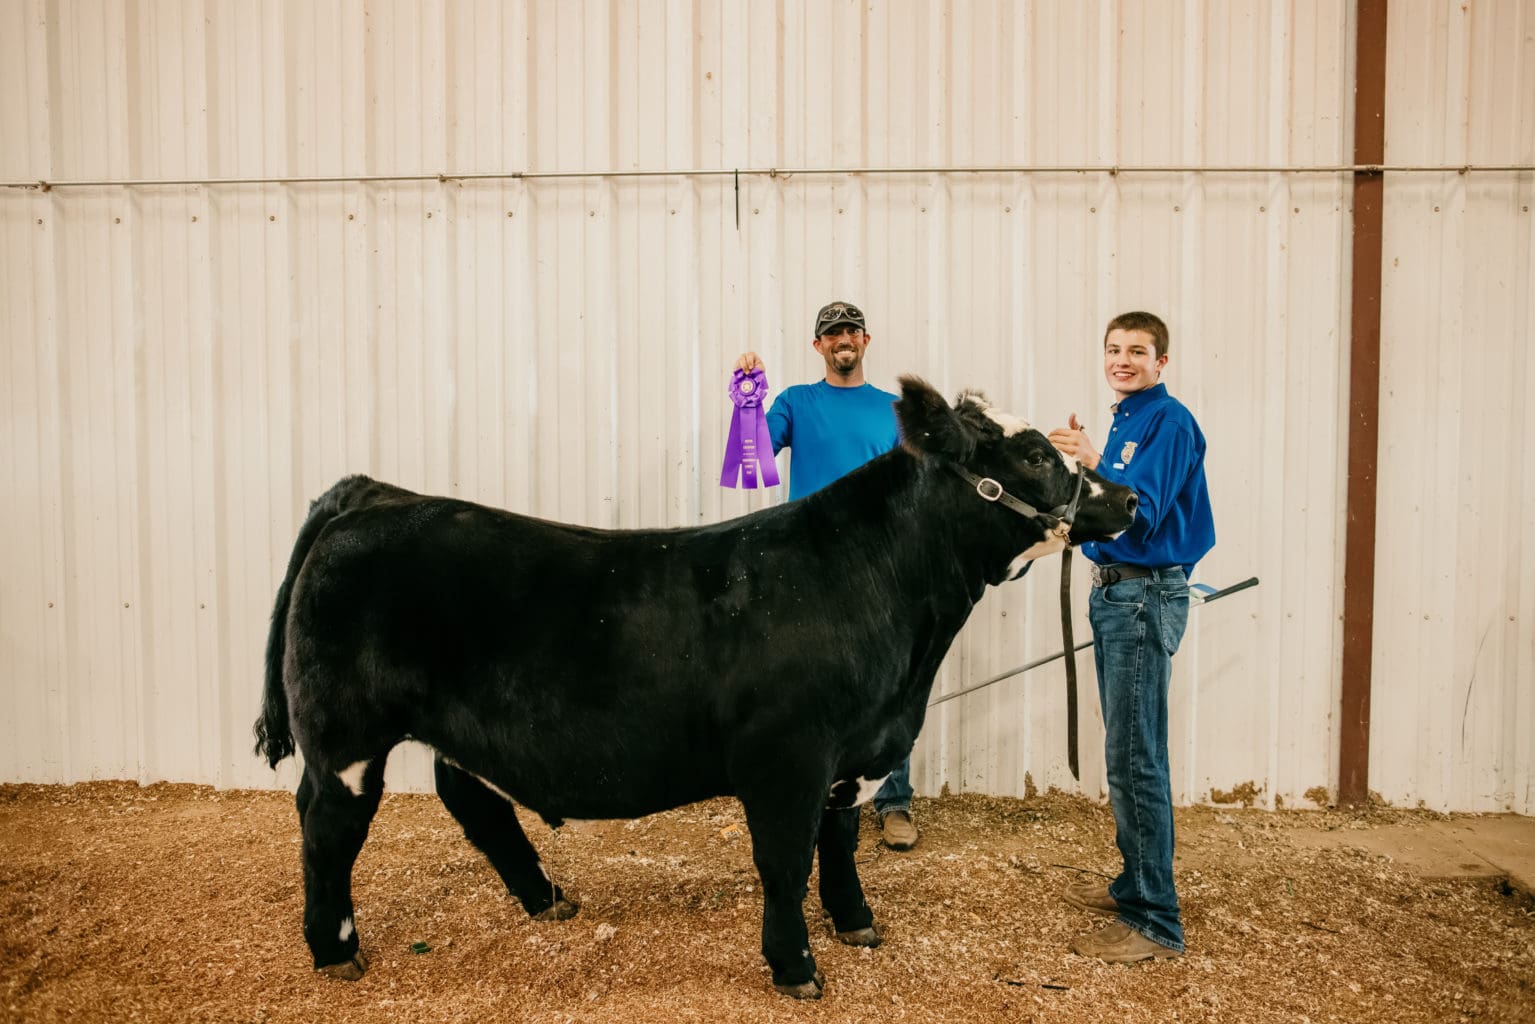 HENNESSEY DID WELL AT THE KINGFISHER COUNTY FAIR